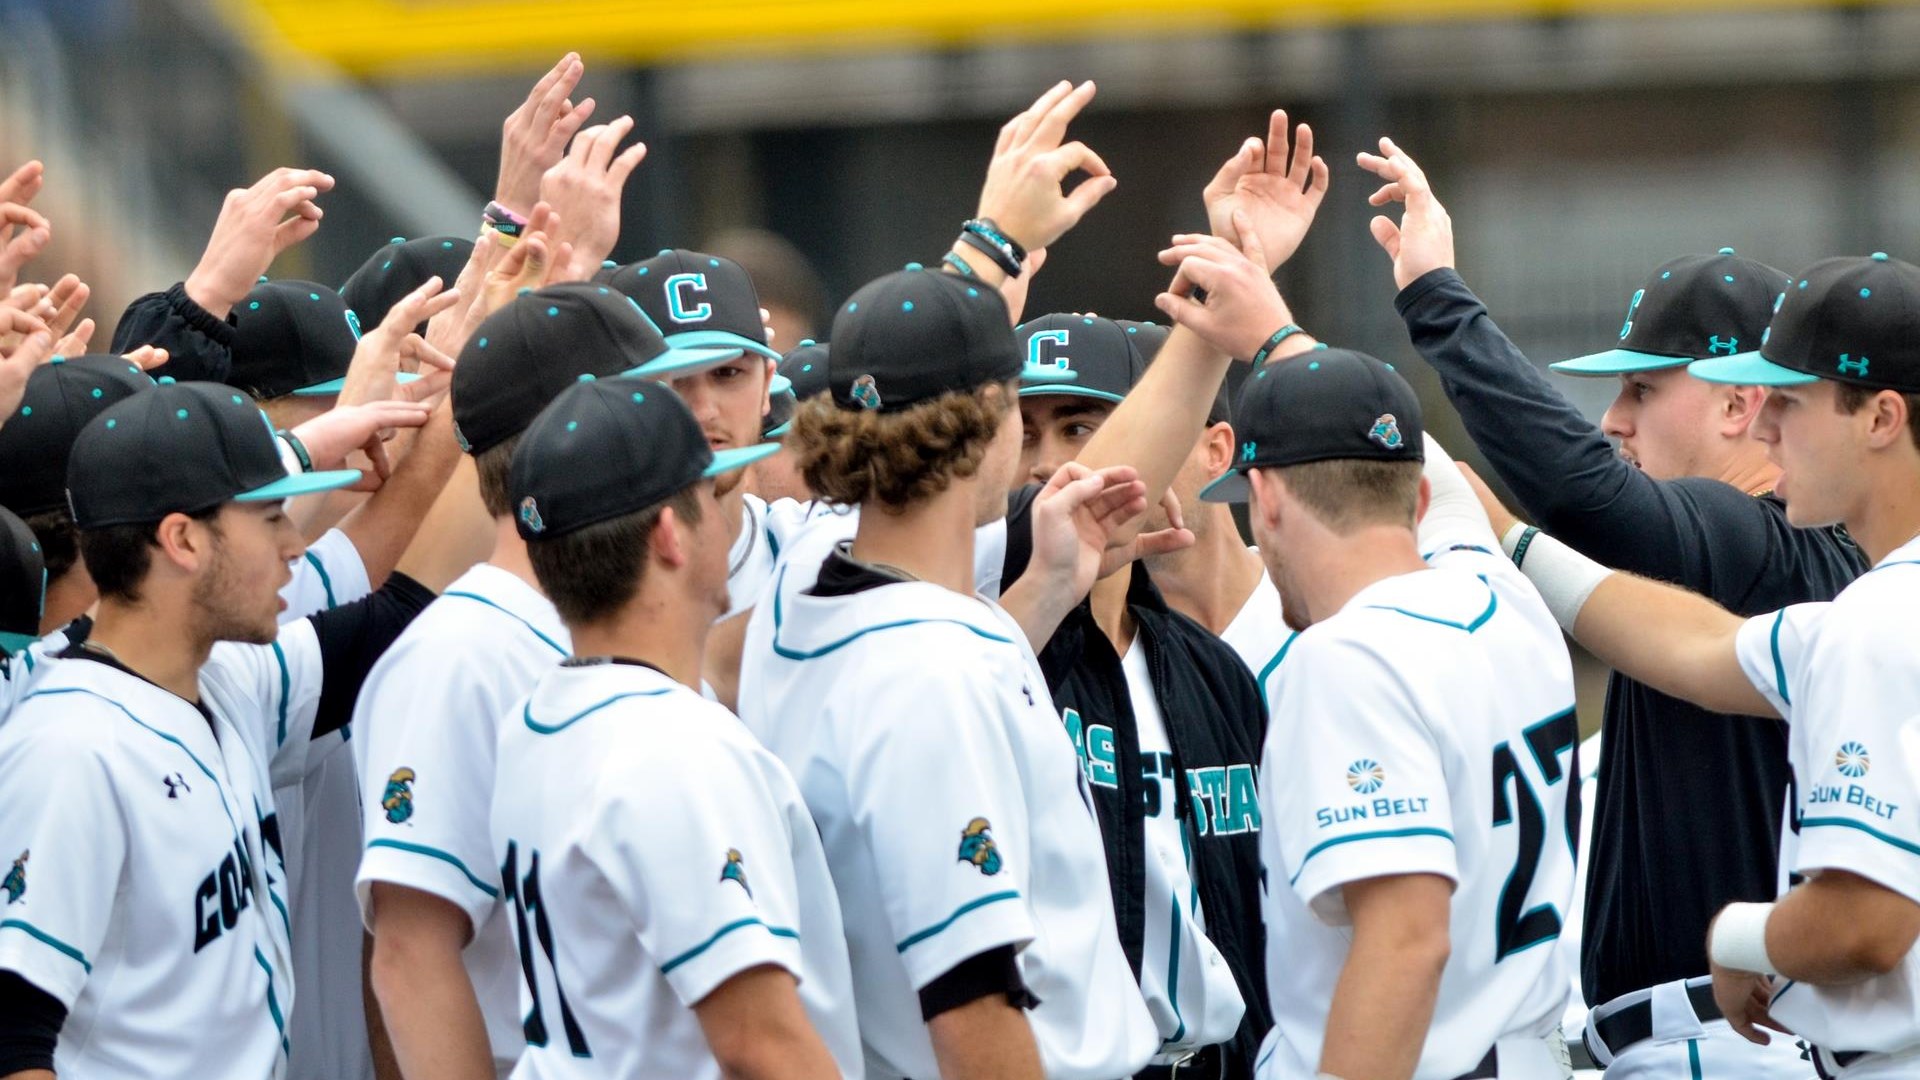 No Chants Return To Action This Weekend At Ccu Baseball